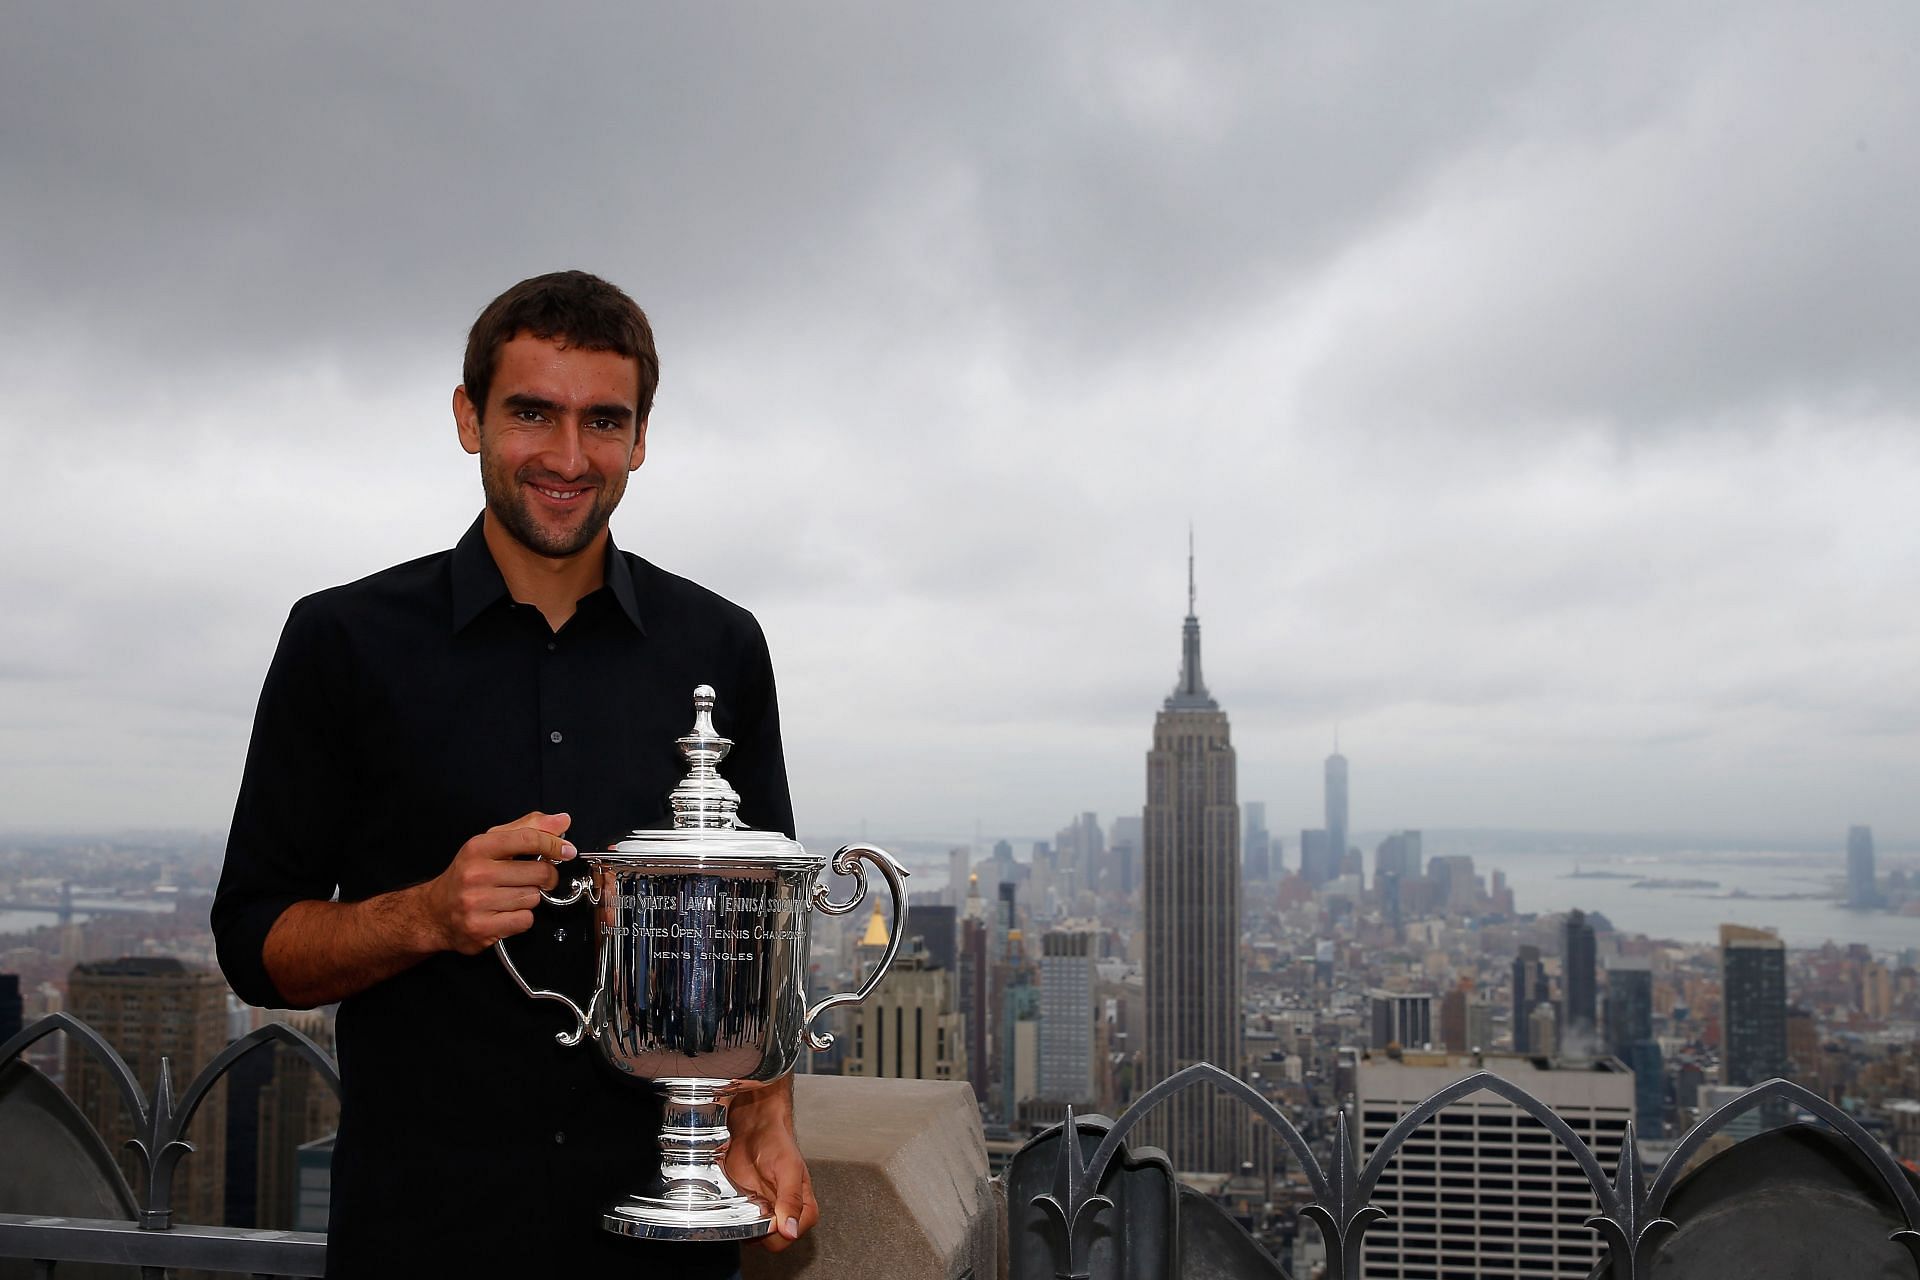 2014 US Open Champion Marin Cilic during the New York City Trophy Tour